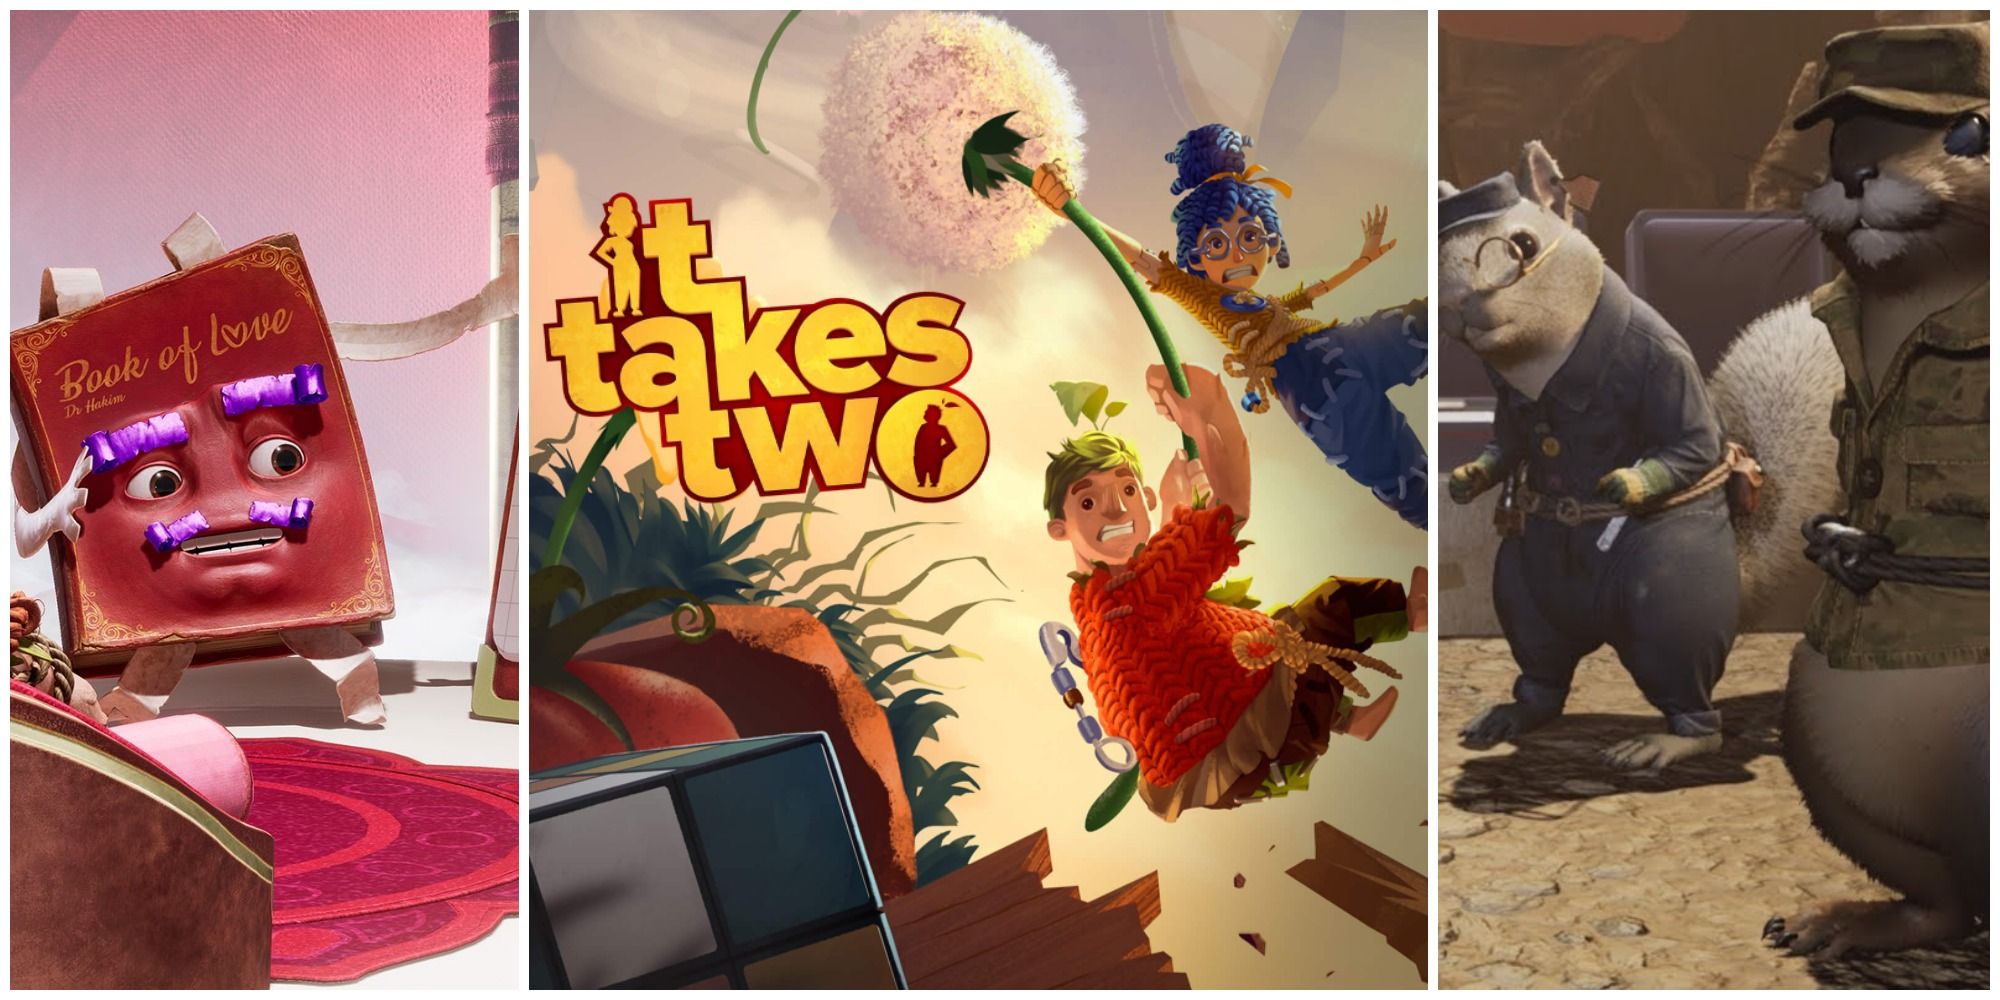 It Takes Two review: A really fun way to tell a bit of a boring story